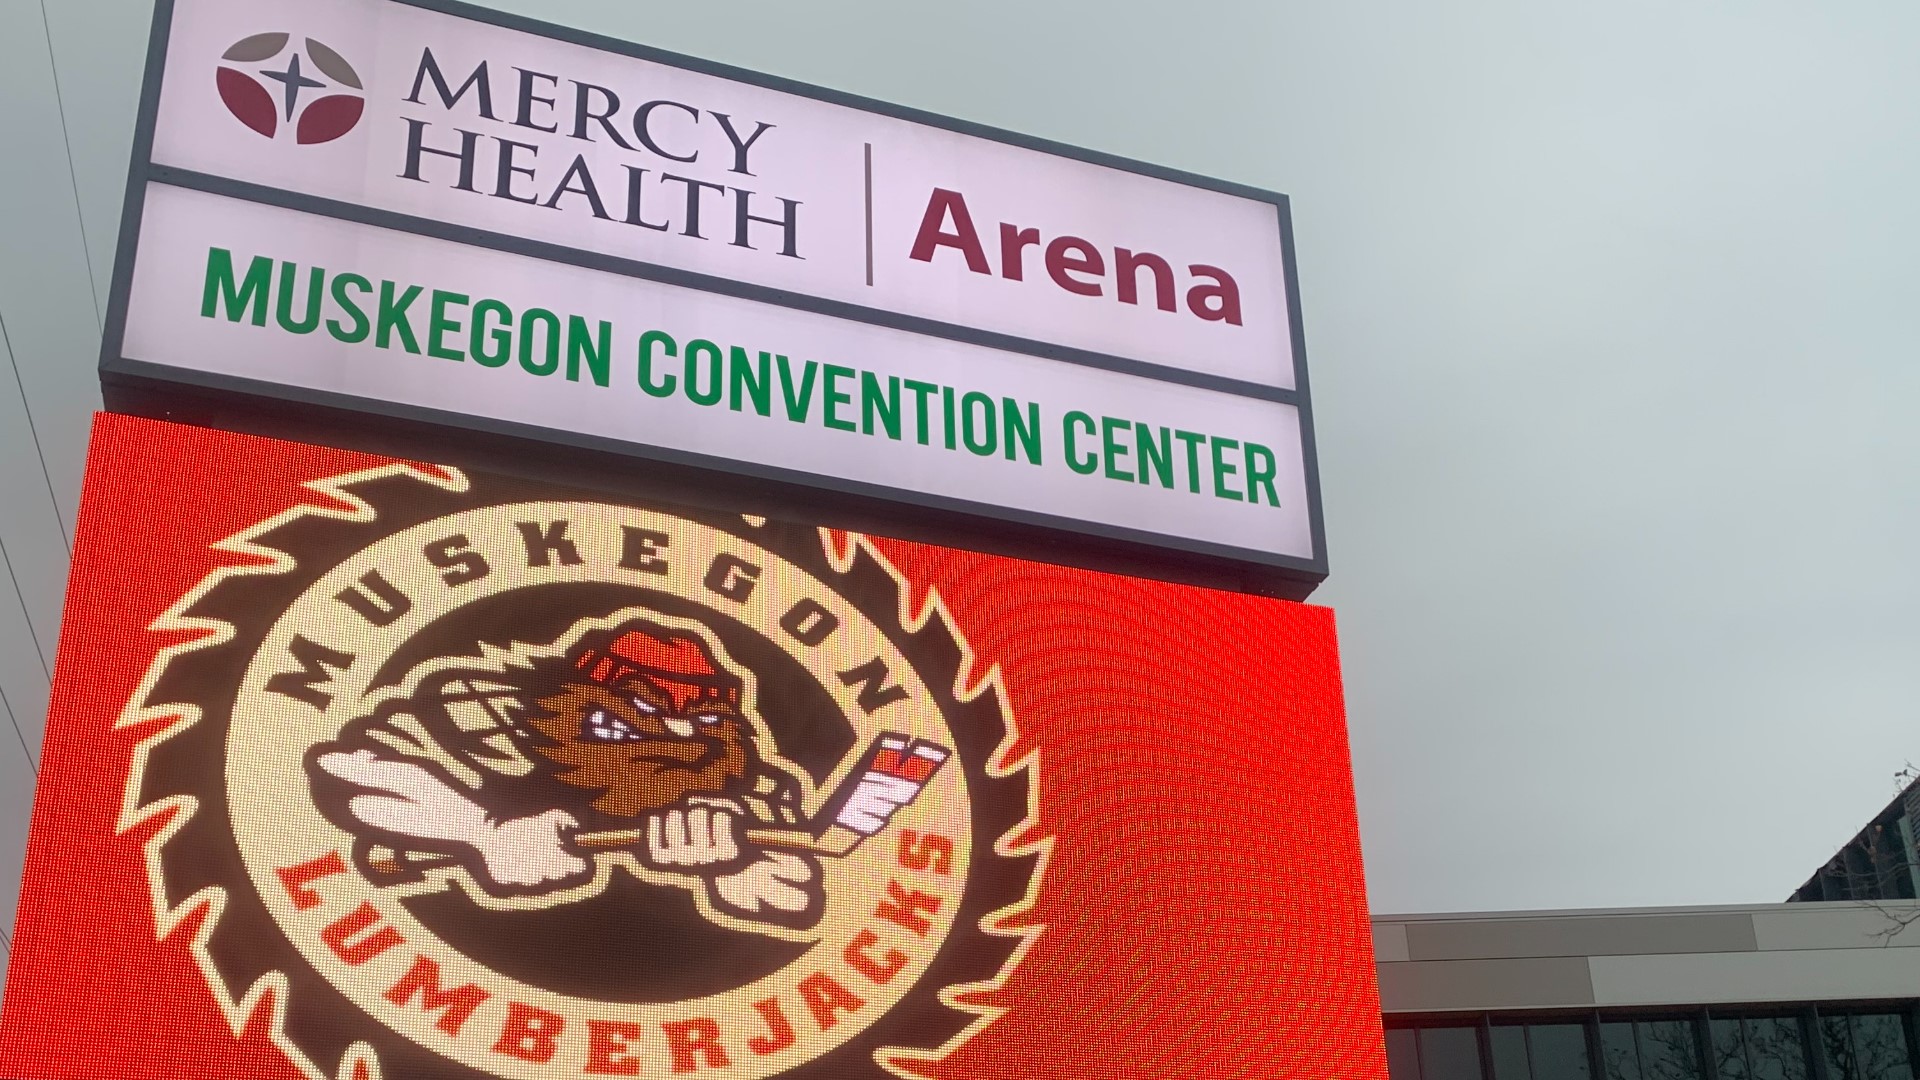 In February, Muskegon City Commissioners finalized an arena naming rights agreement with Mercy Health that was first announced in 2019.